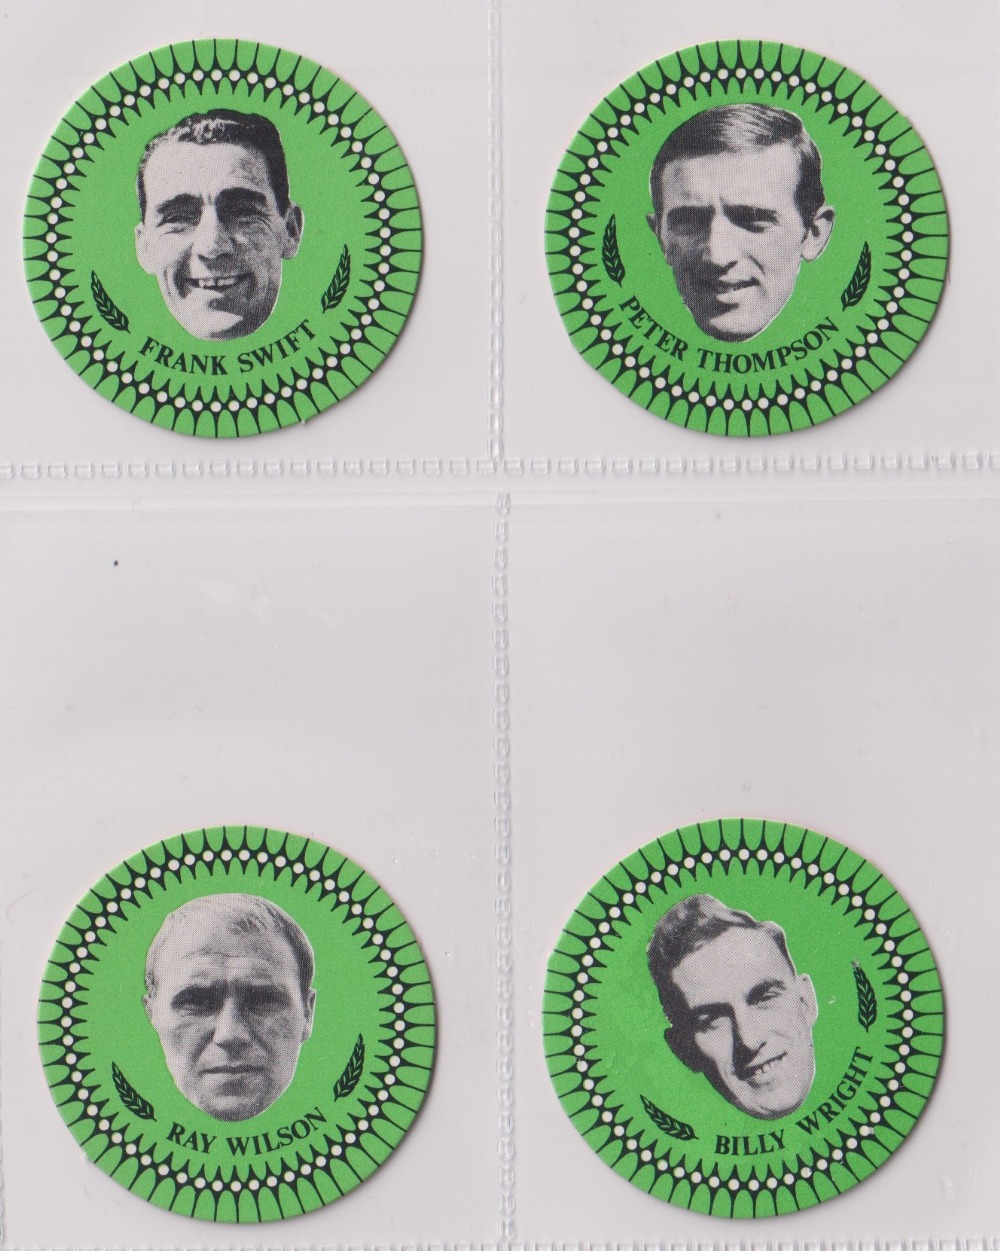 Trade cards, Tonibell, Team of All Time (Football), circular, 'K' size (set, 36 cards) (gd) - Image 6 of 6